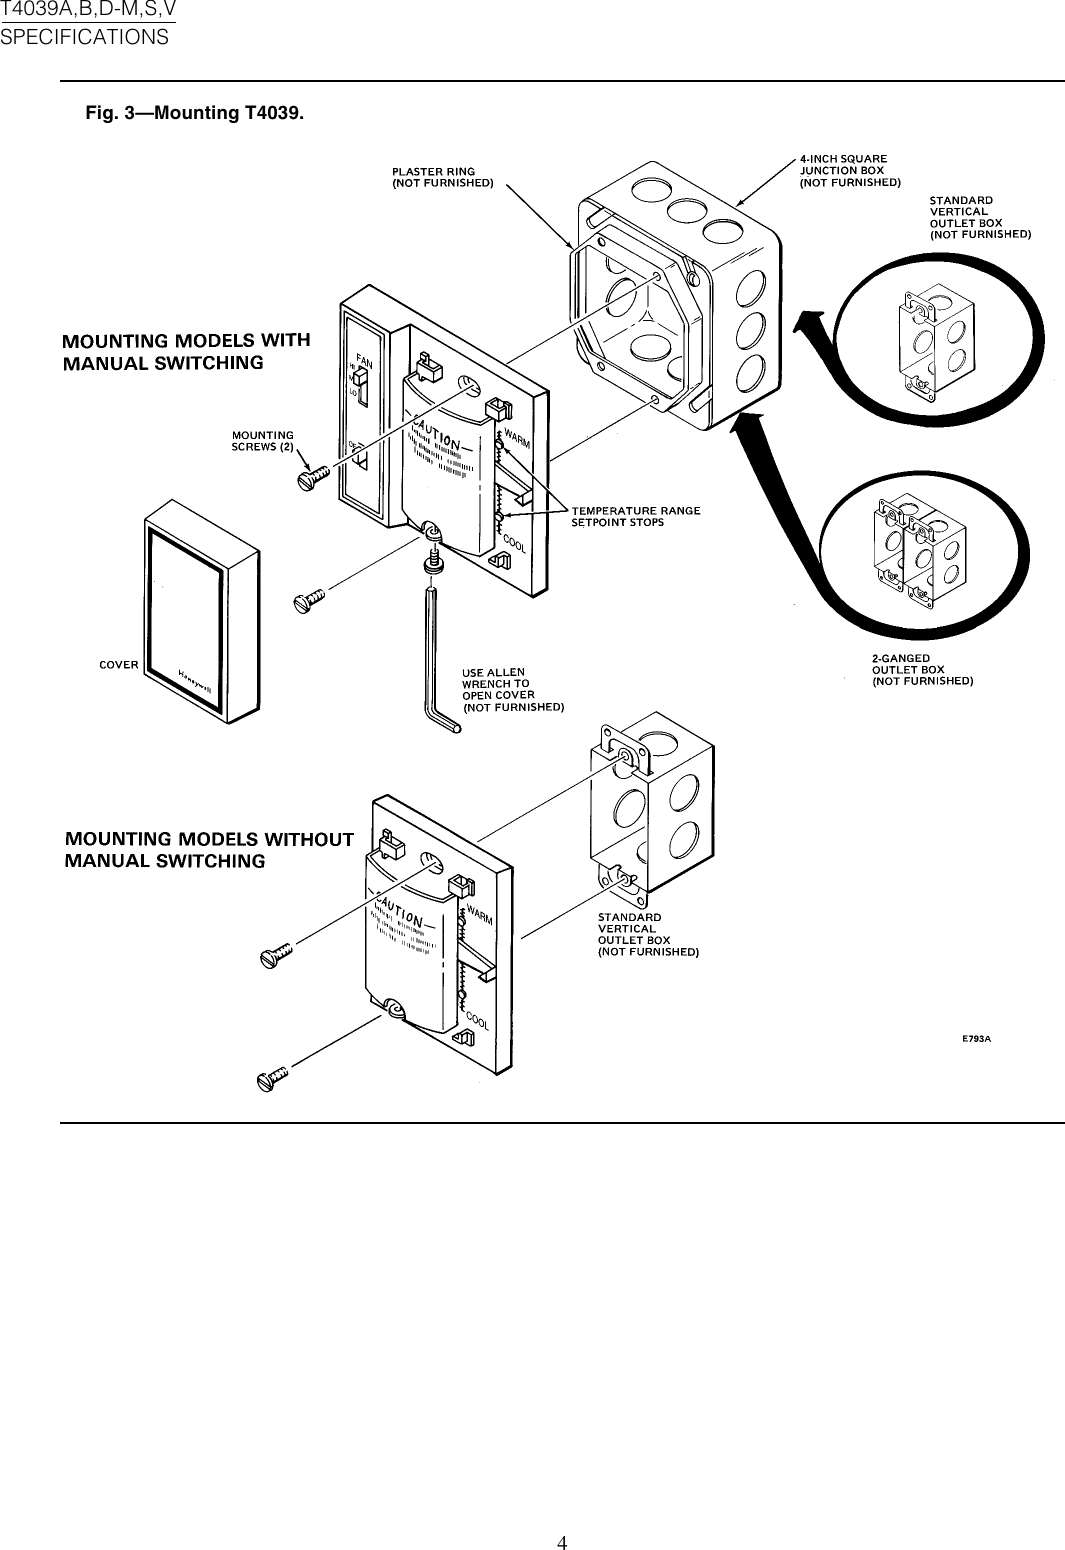 Page 4 of 8 - Honeywell Honeywell-T4039A-Users-Manual- 60-2241 - T4039A,B,D-M,S,V Line Voltage Cooling And Heating-Cooling Thermostats  Honeywell-t4039a-users-manual